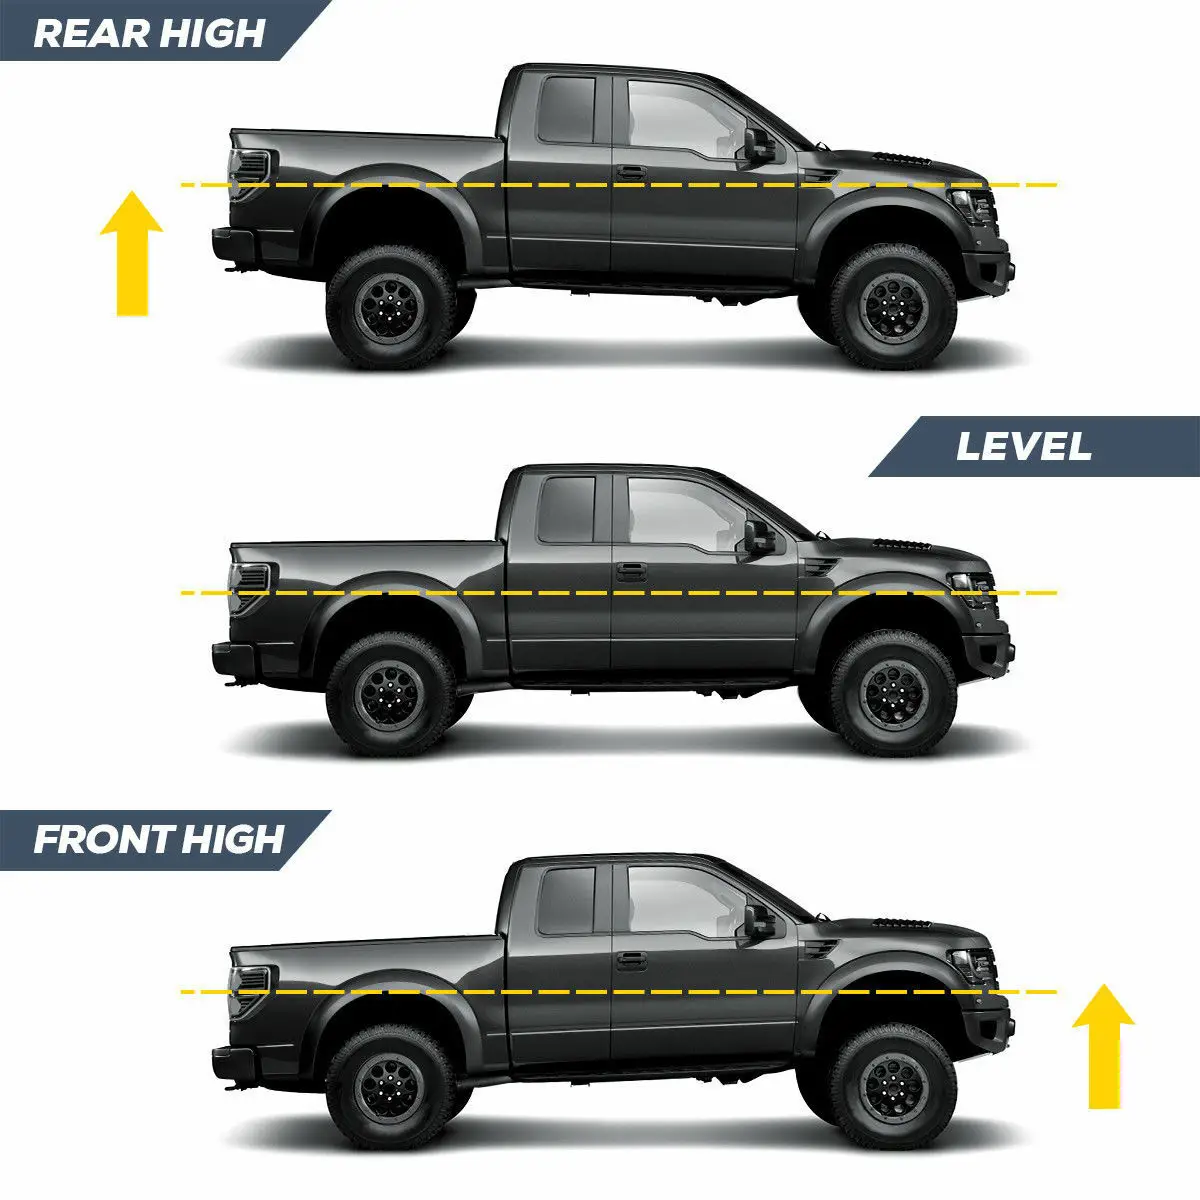 ZY Wheel 3 Front and 2 Rear Leveling Lift Kit for 2004-2019 Ford F150 2WD 4WD Will Rise Your F150 Front 3 and Rear 2 